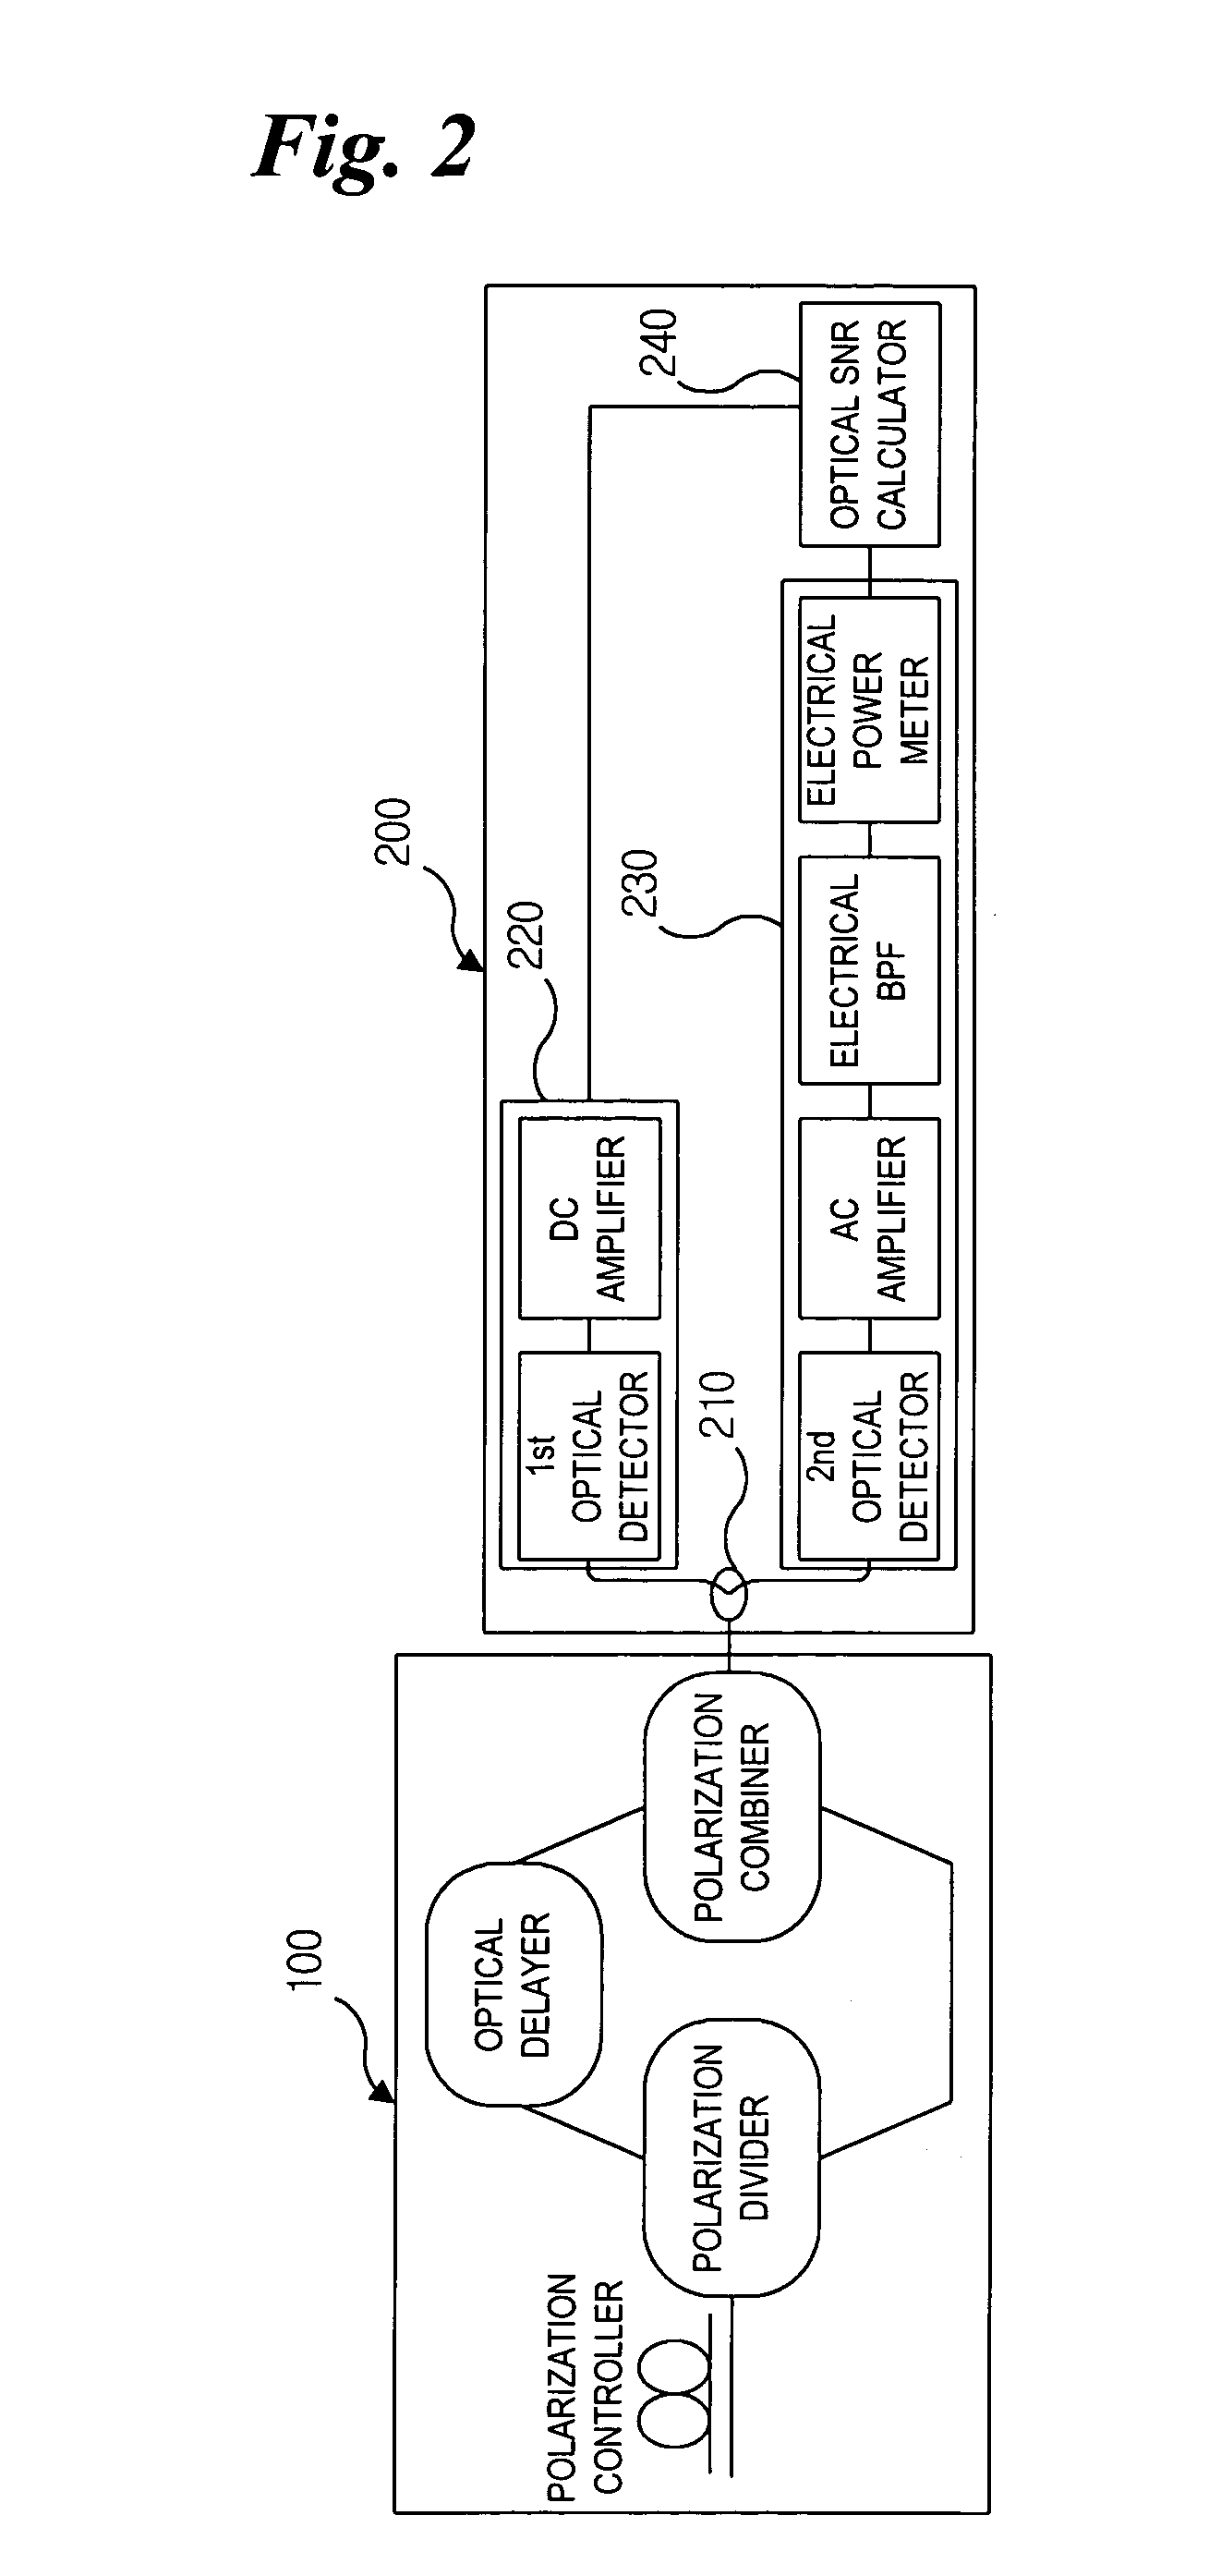 Apparatus for monitoring optical signal-to-noise ratio